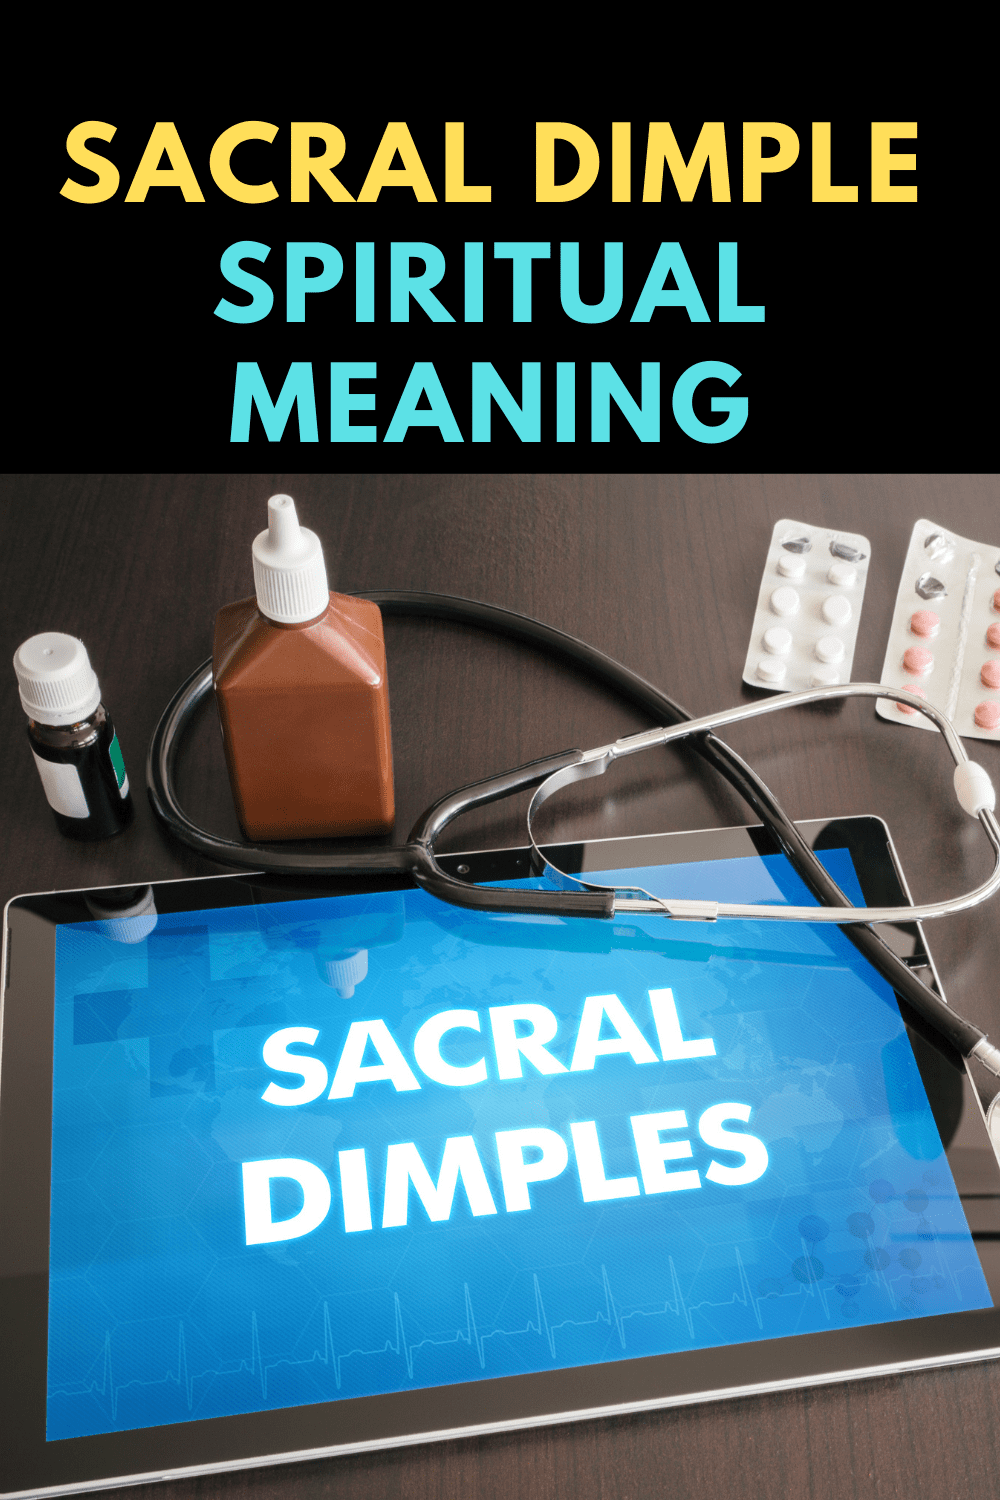 What is the spiritual meaning of the sacral dimple?